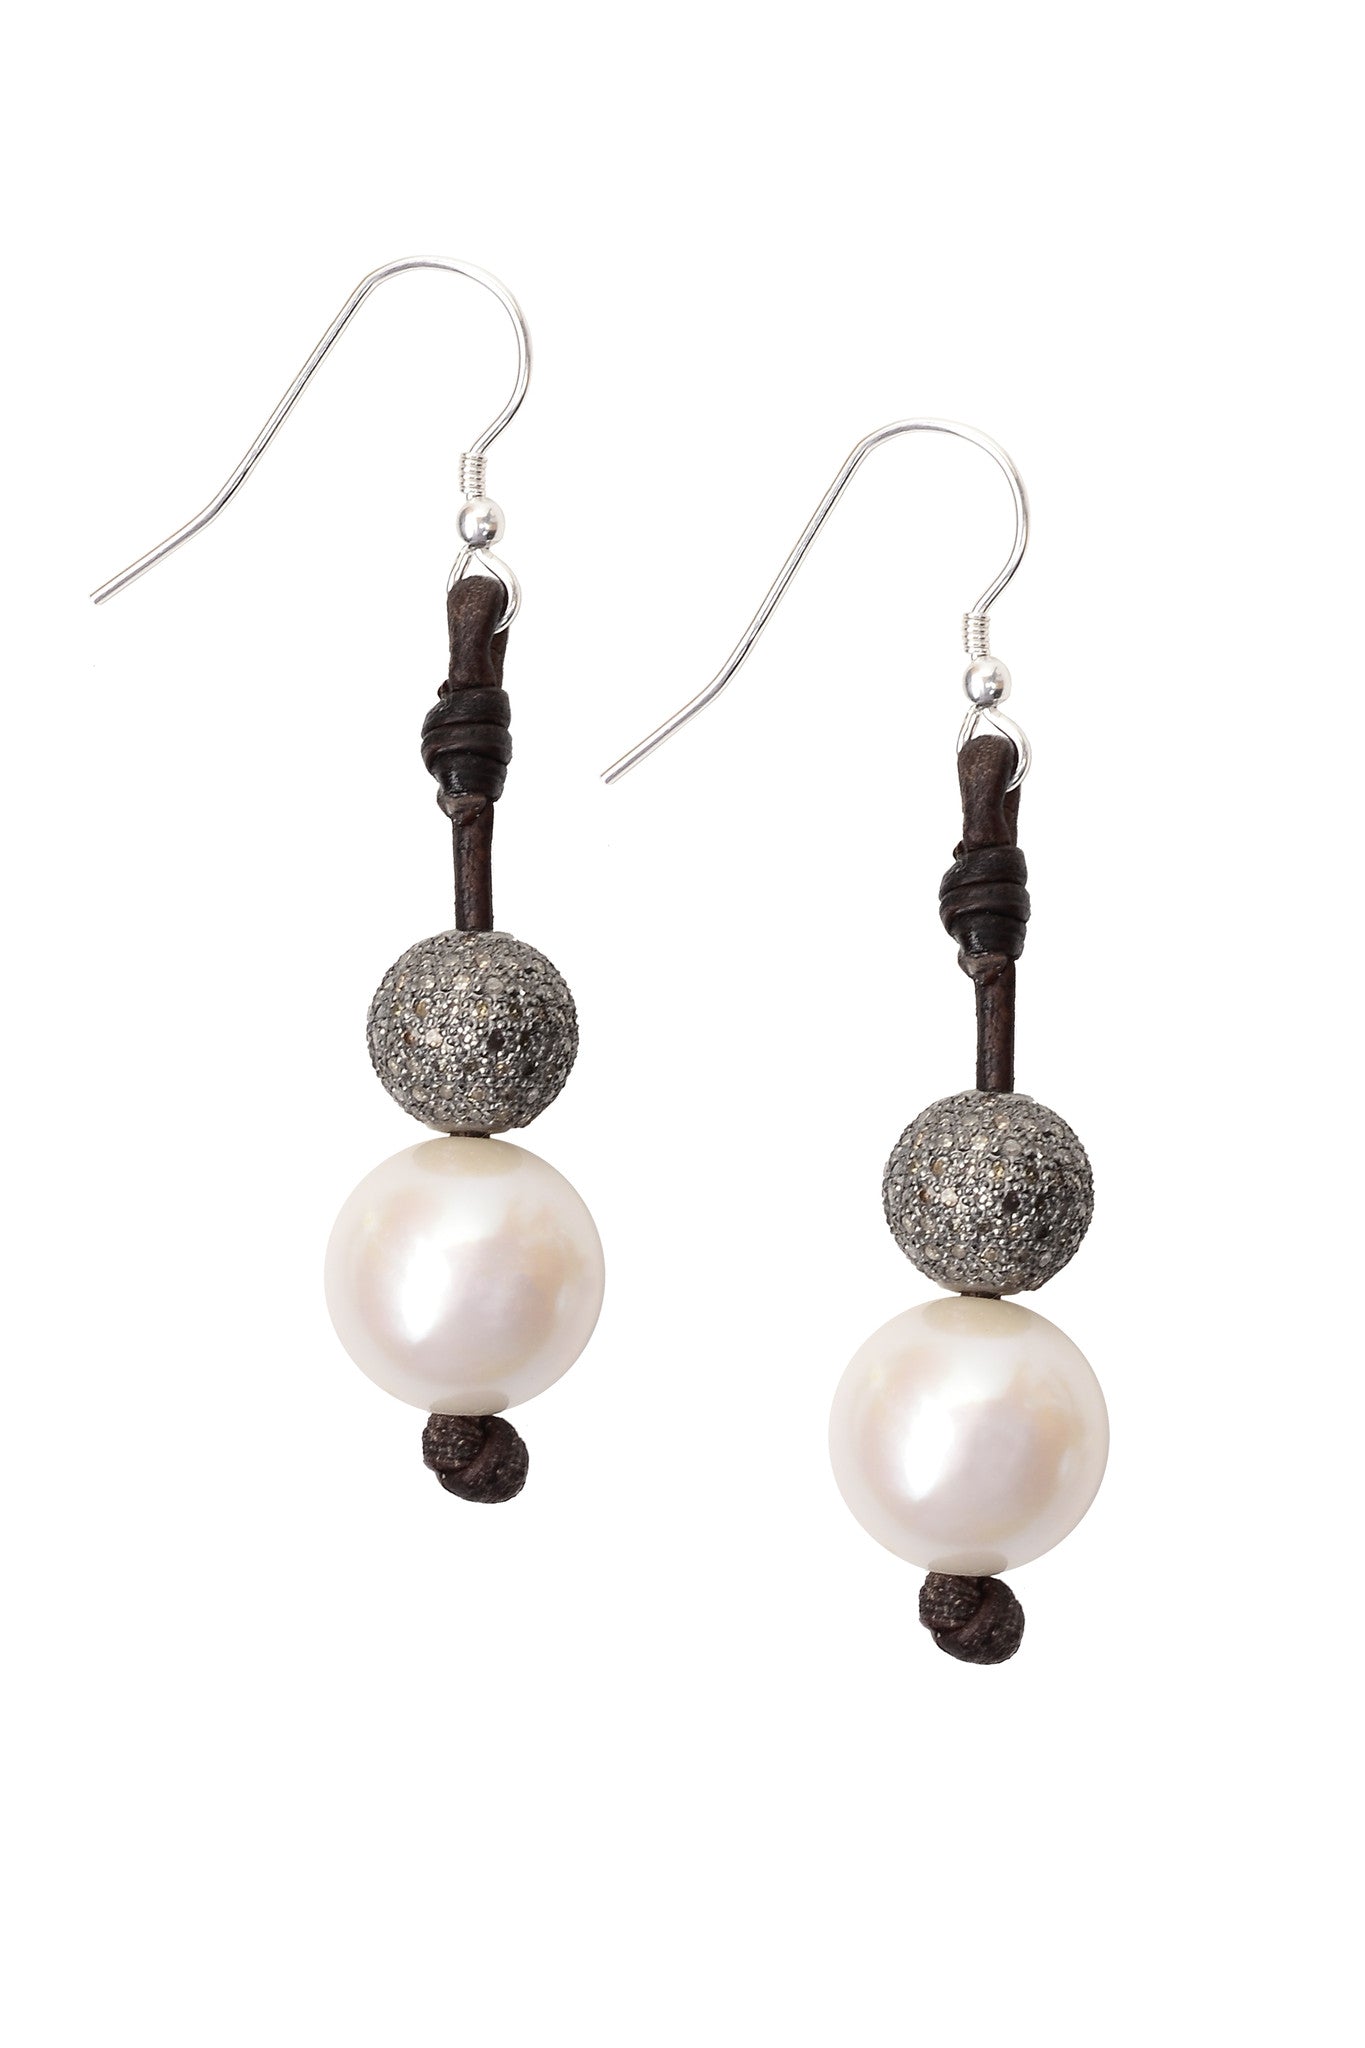 Diamond Seaplicity Earrings - Hottest Designer Pearl and Leather Jewelry | VINCENT PEACH
